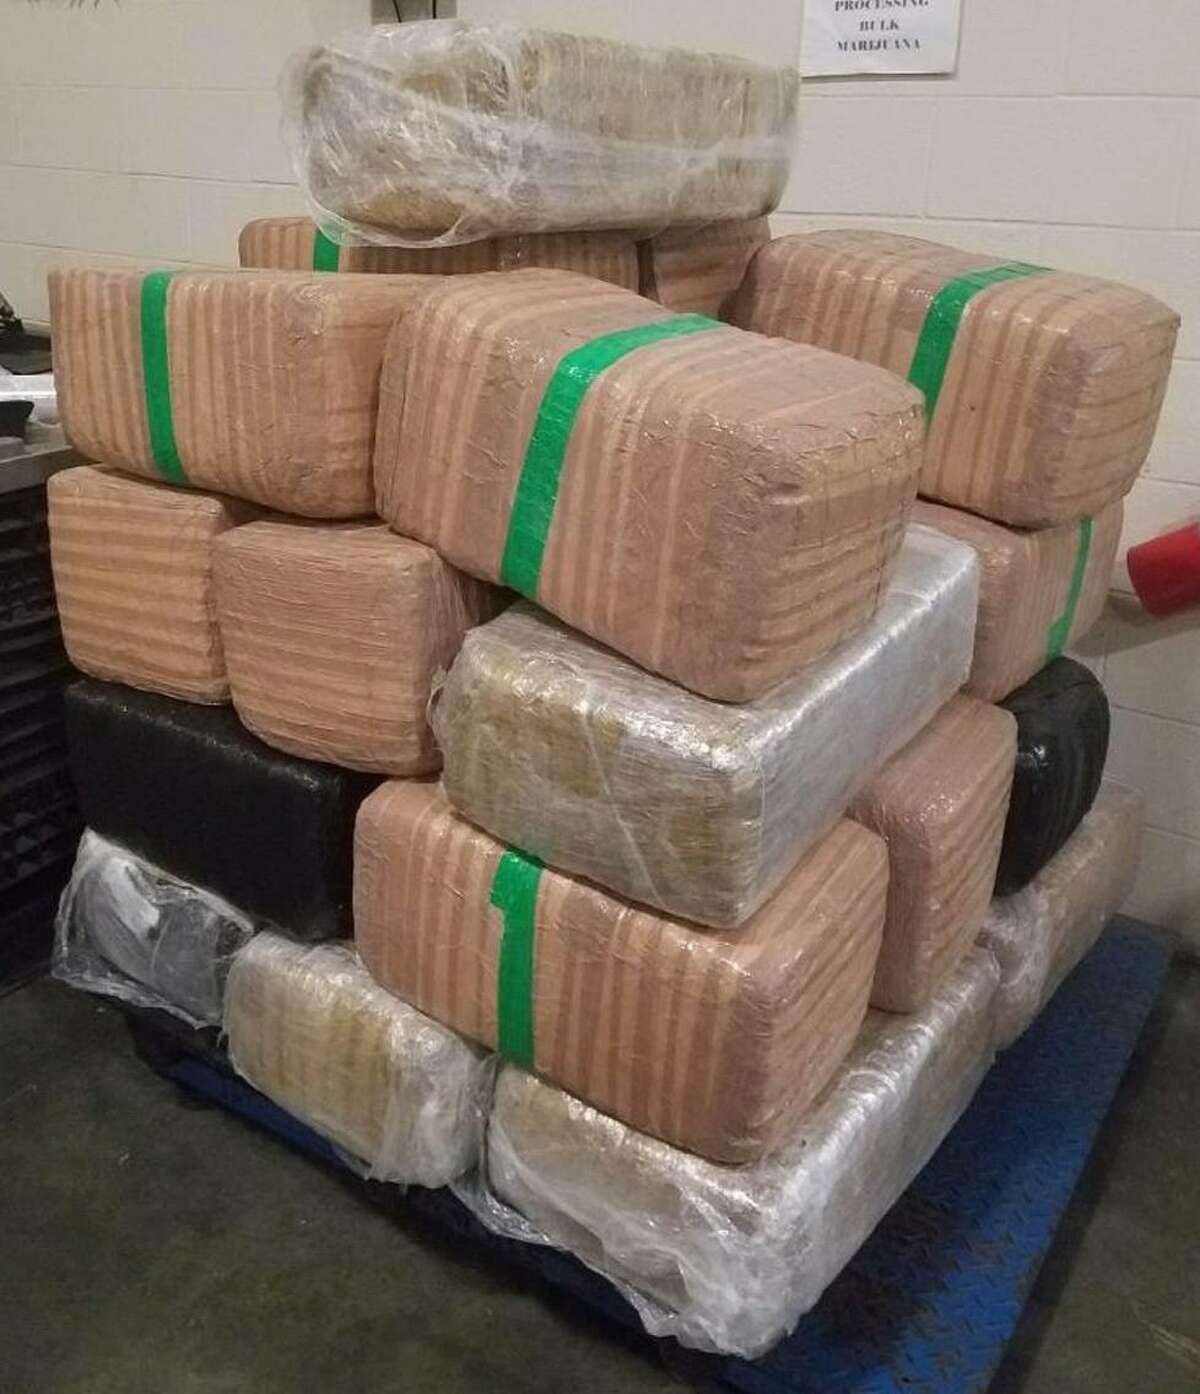 Laredo police seized about 1,100 pounds of marijuana late Wednesday following a brief vehicle pursuit.